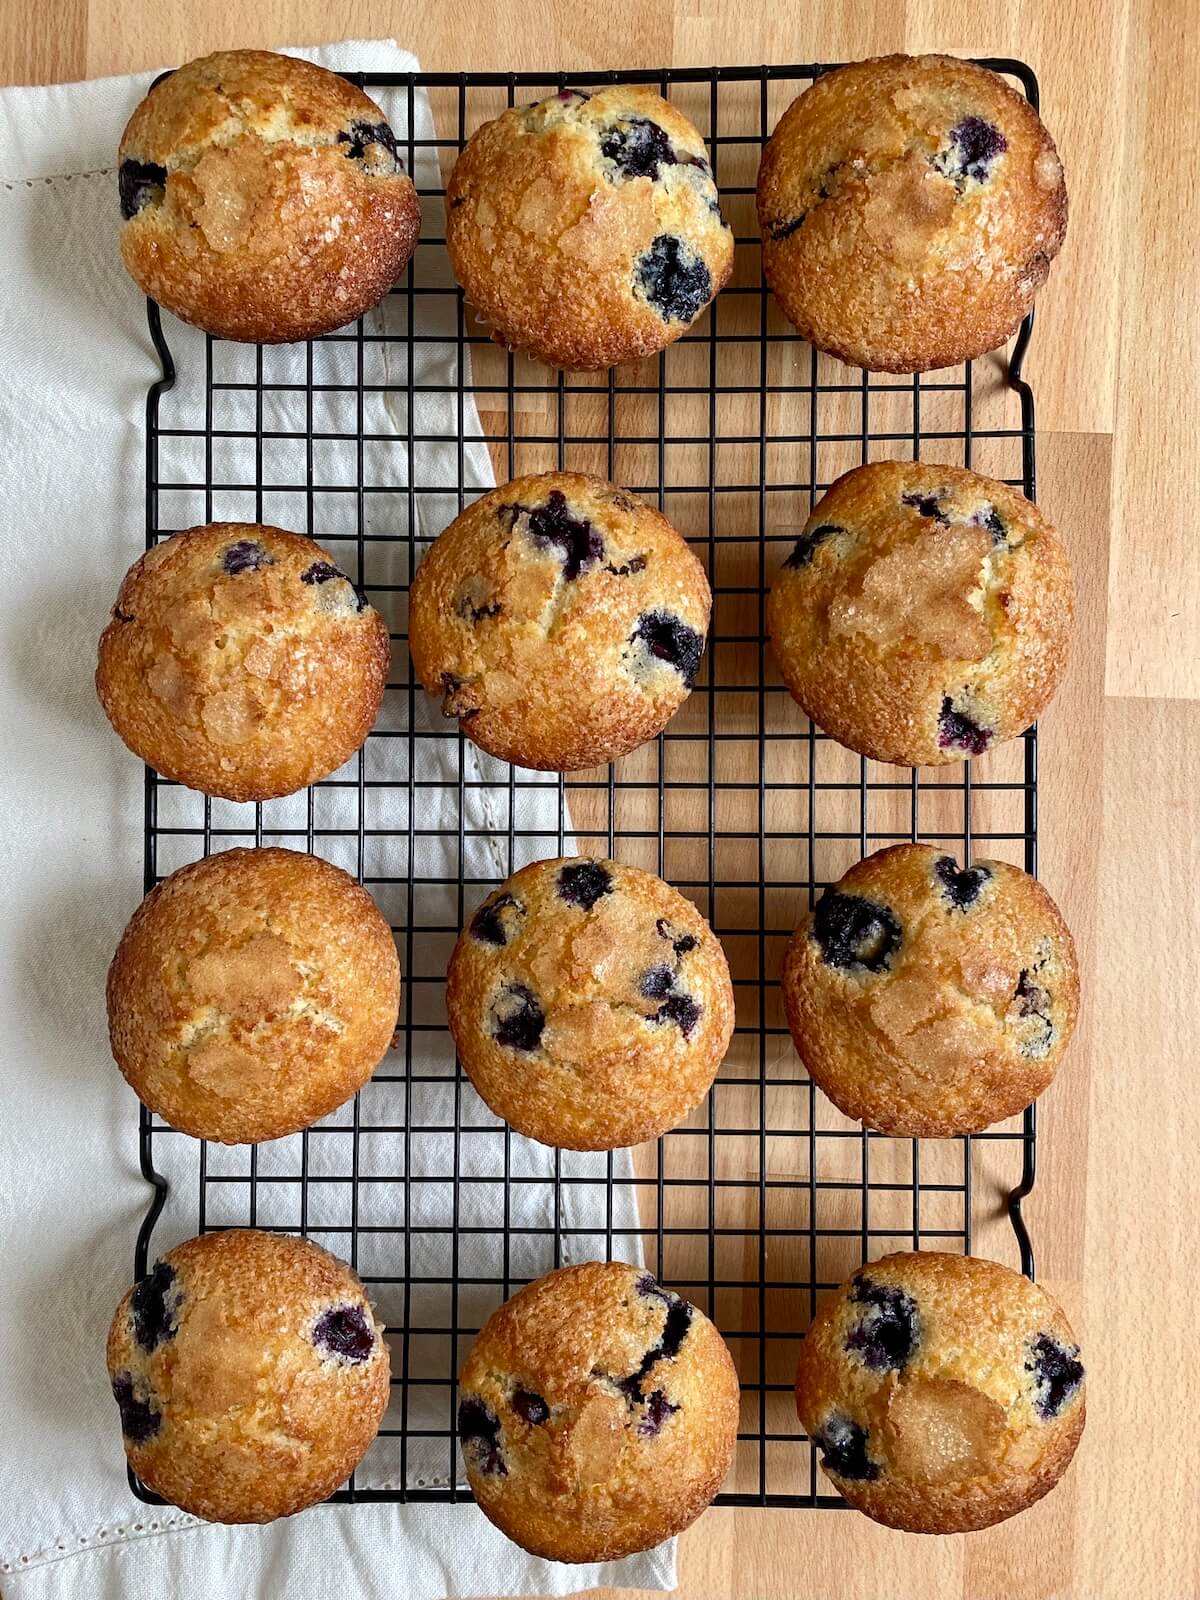 Baked blueberry chocolate chip muffins cooling on a wire rack. Beneath the rack is a white cloth napkin.